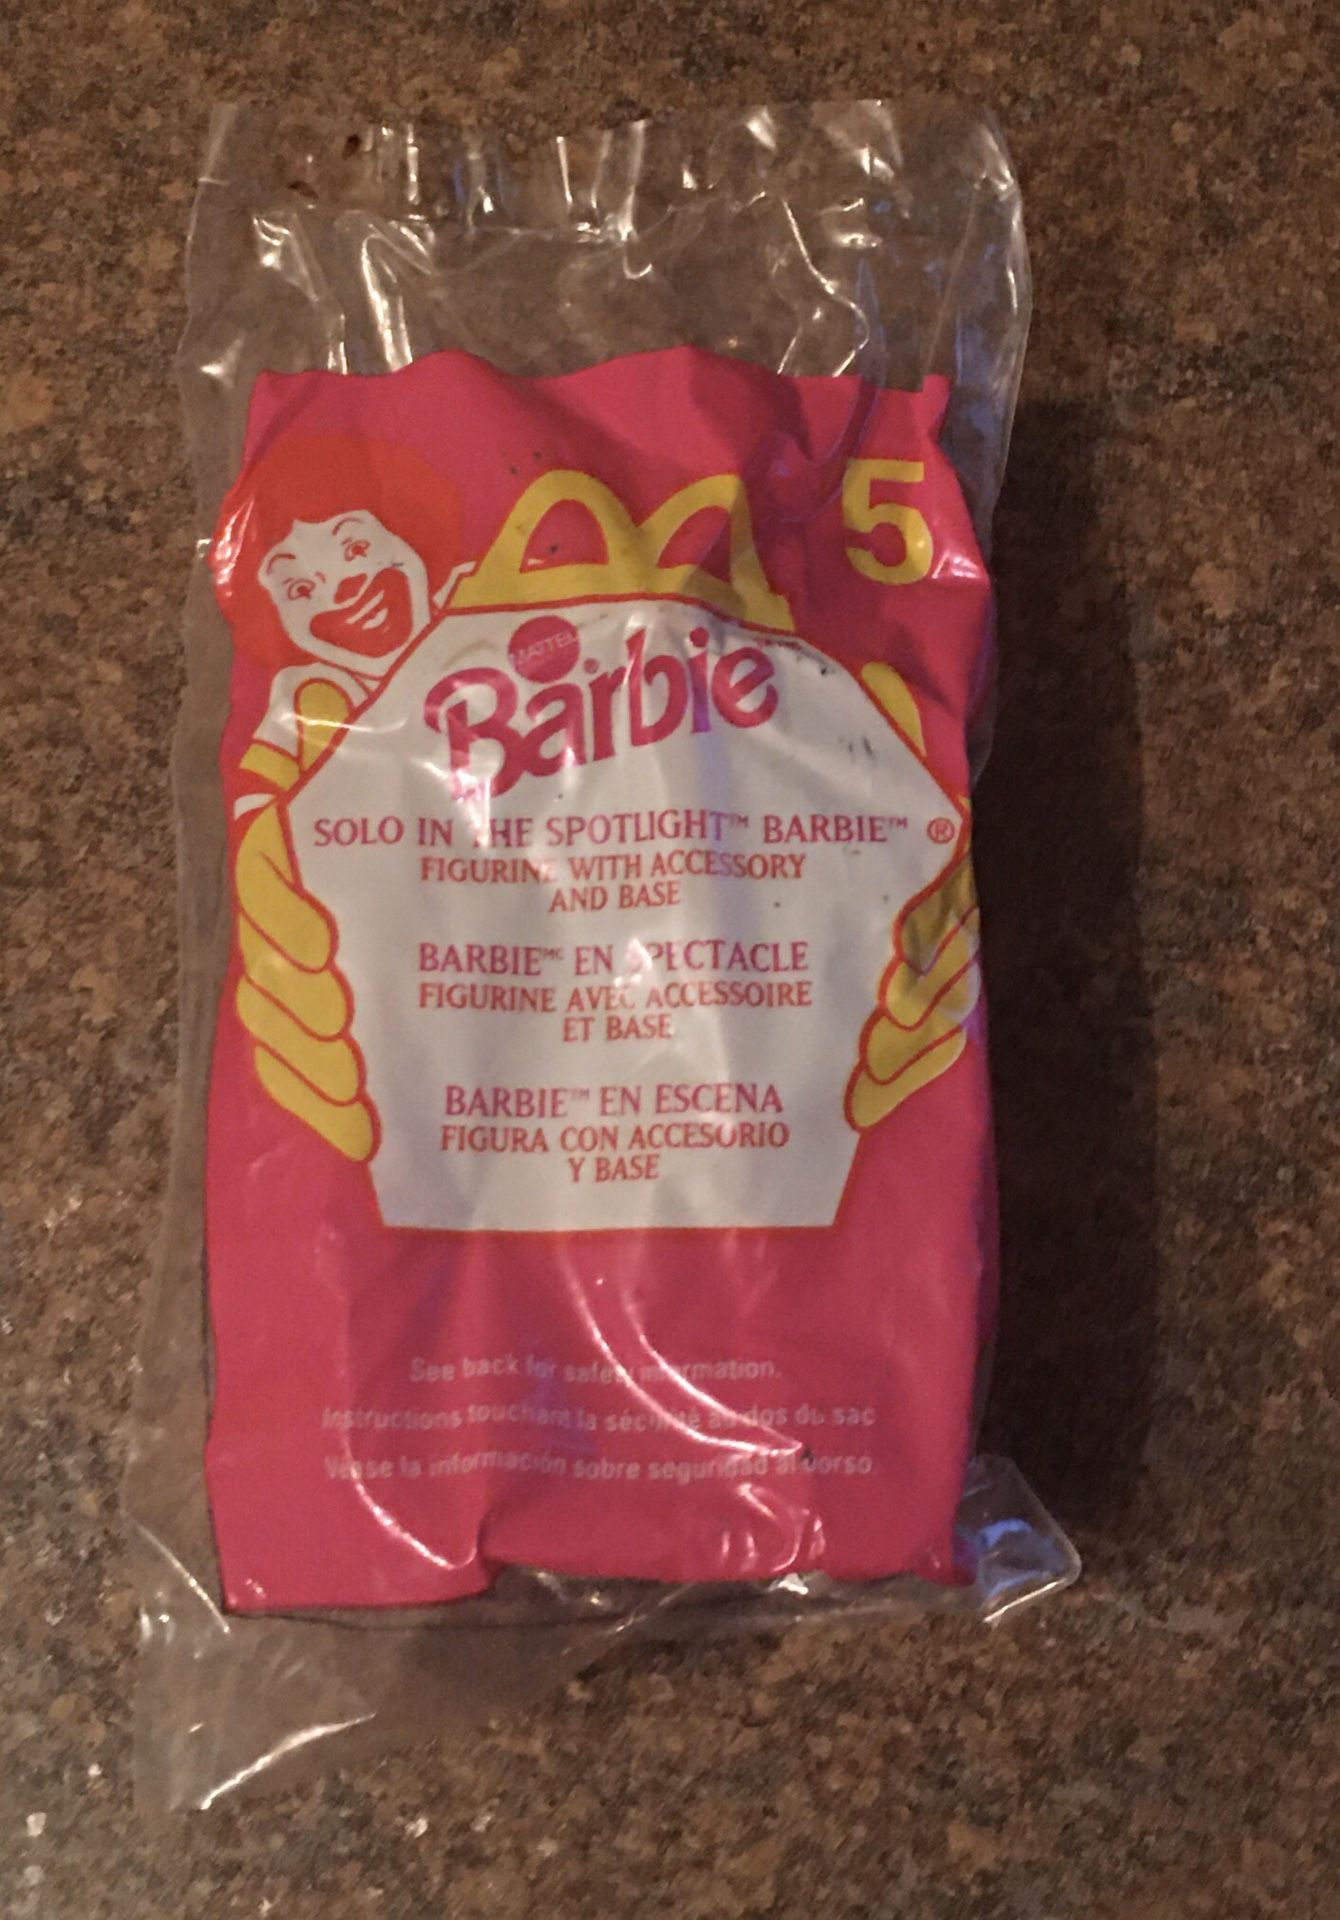 Vintage McDonald’s Happy Meal 1999 #5 Barbie Solo In The Spotlight Barbie Figurine - Brand New/Sealed